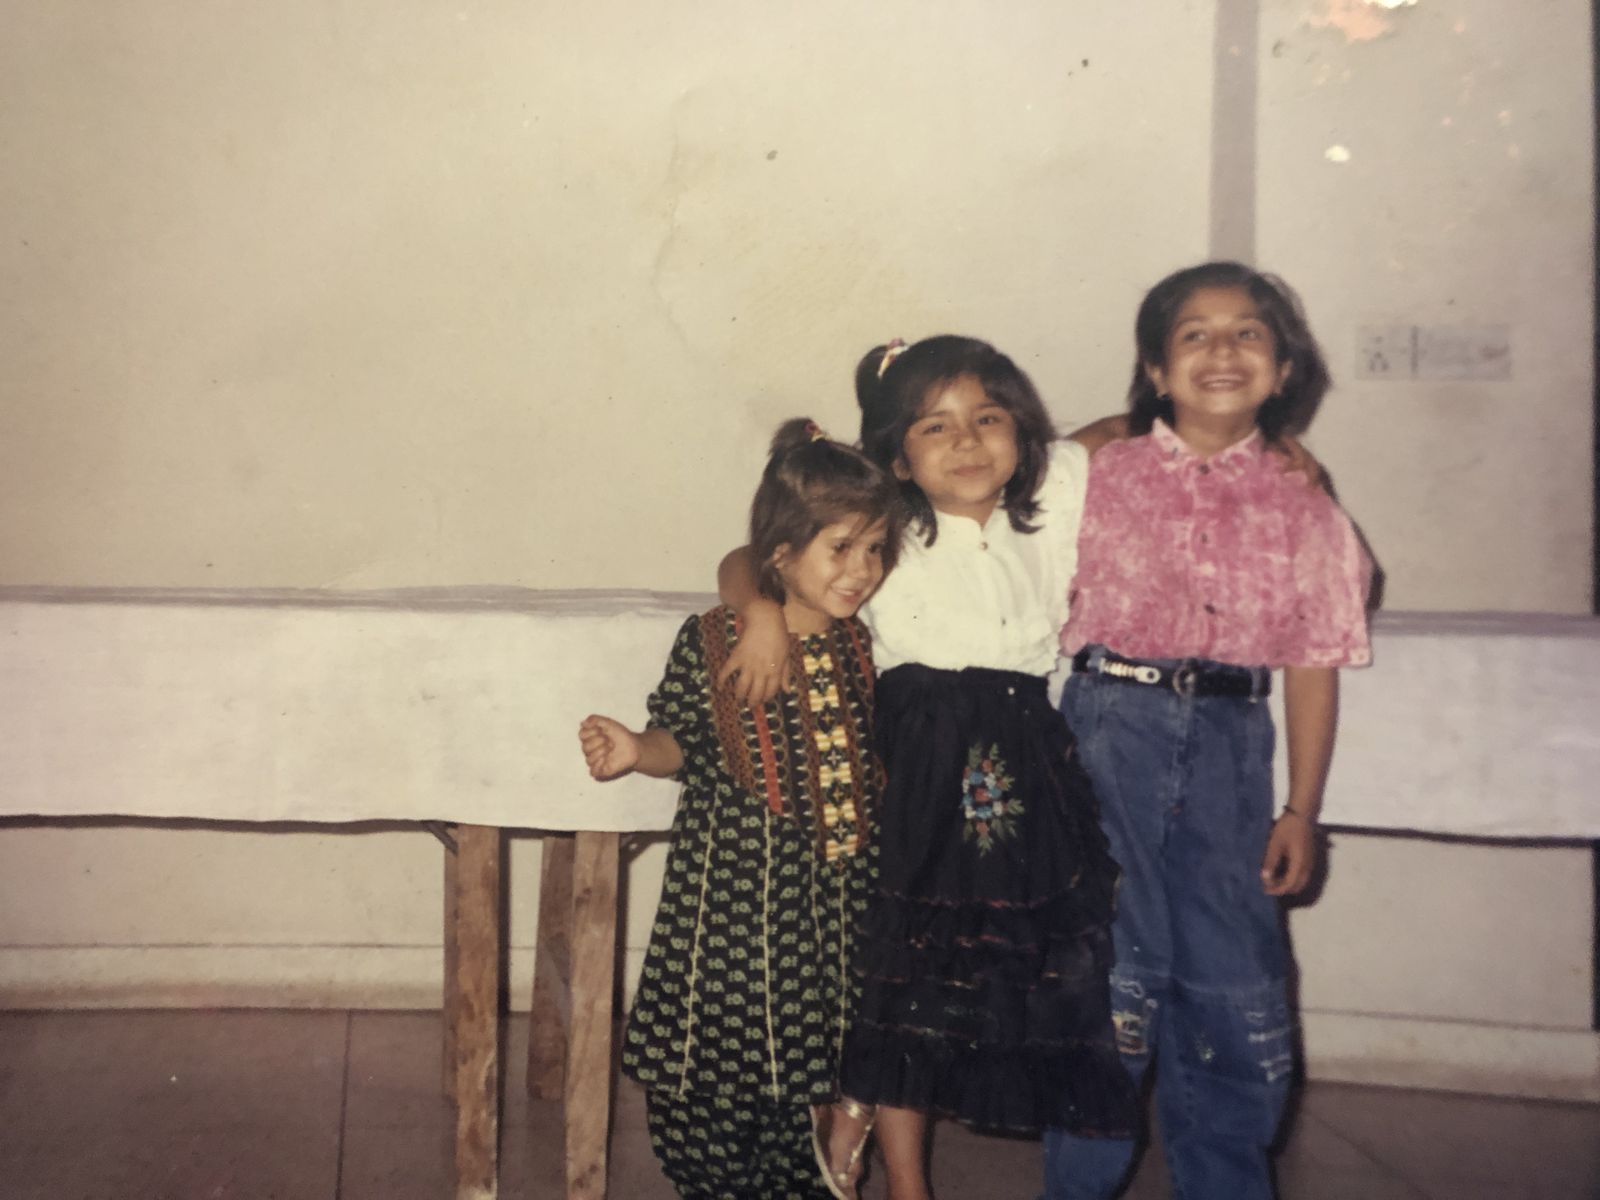 A CHILDHOOD PHOTOGRAPH WITH SISTER AND ANOTHER CHILD